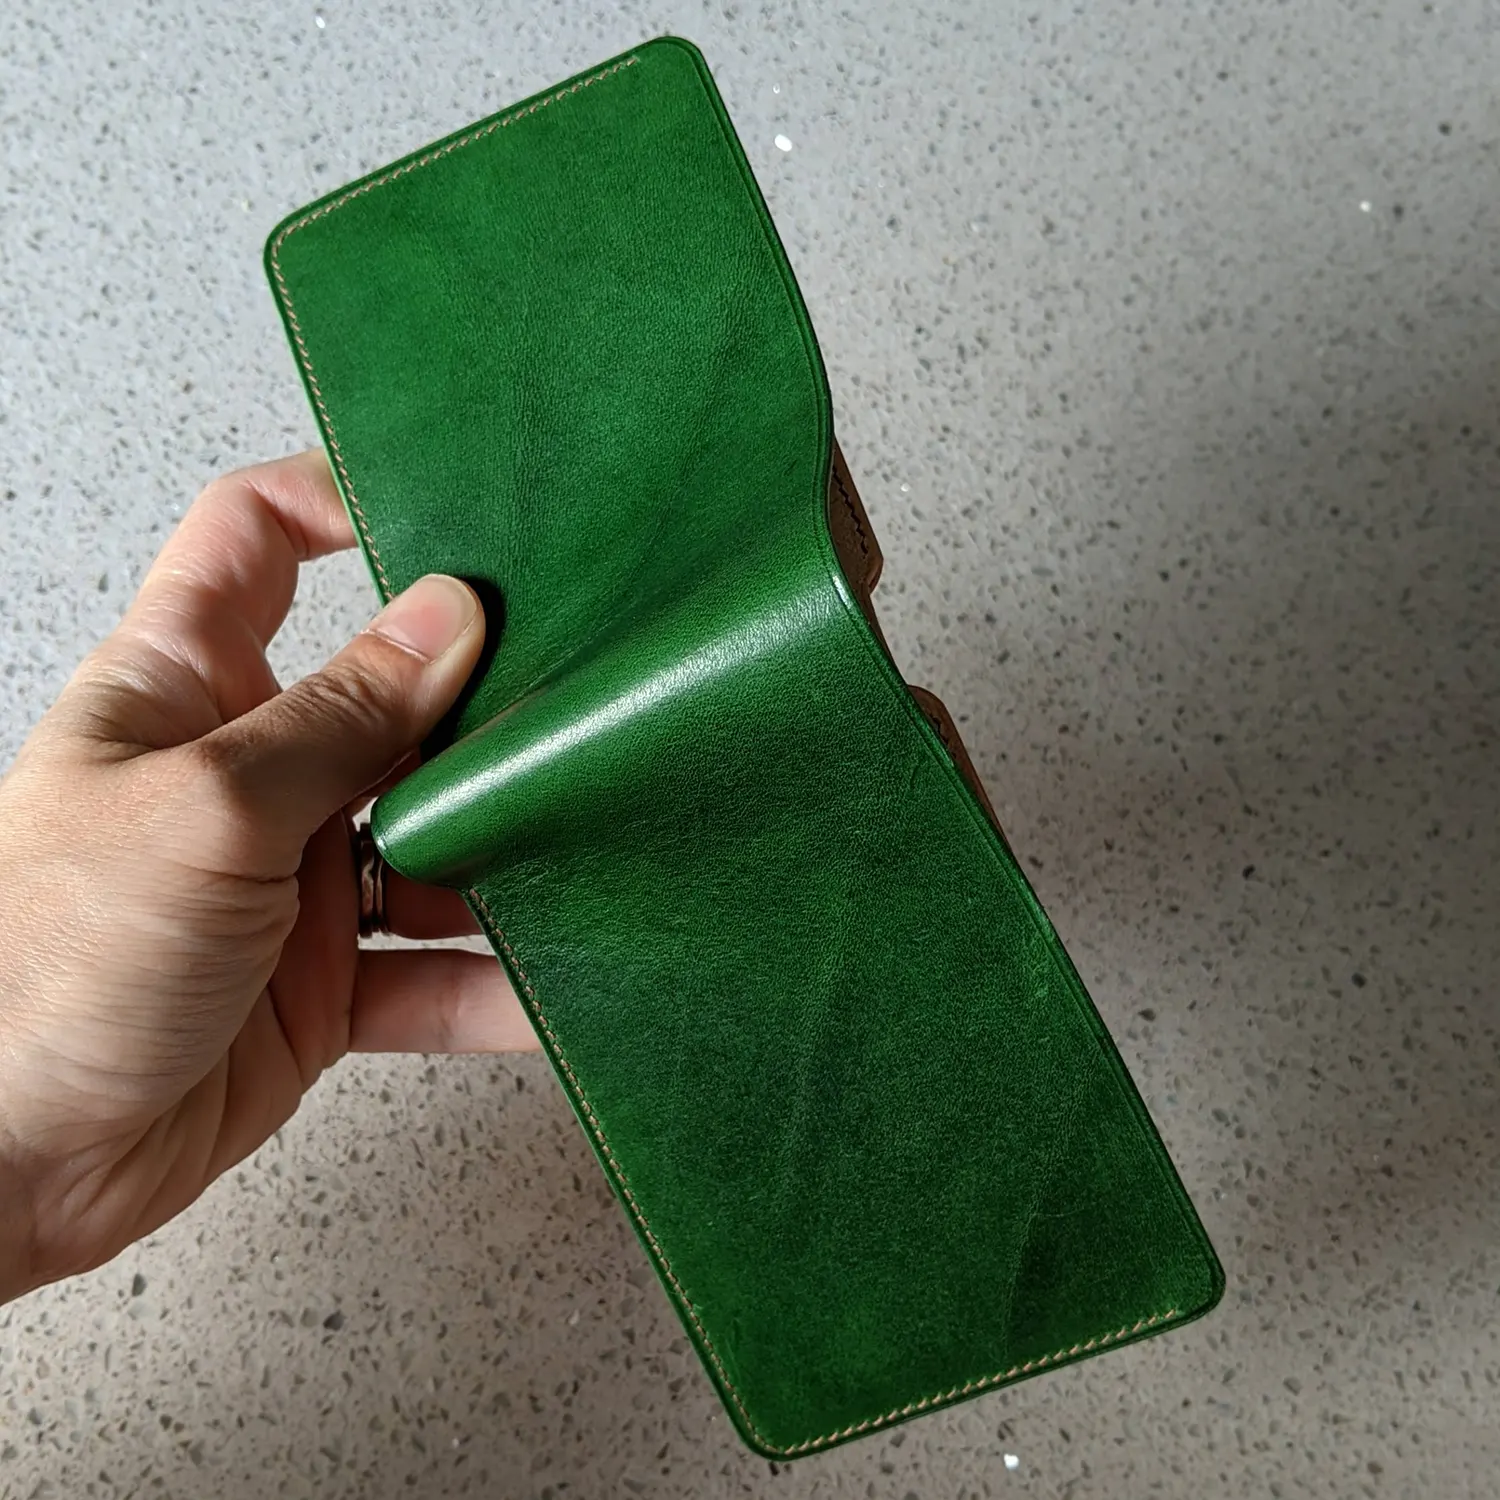 possala designs natural leather emerald green wallet